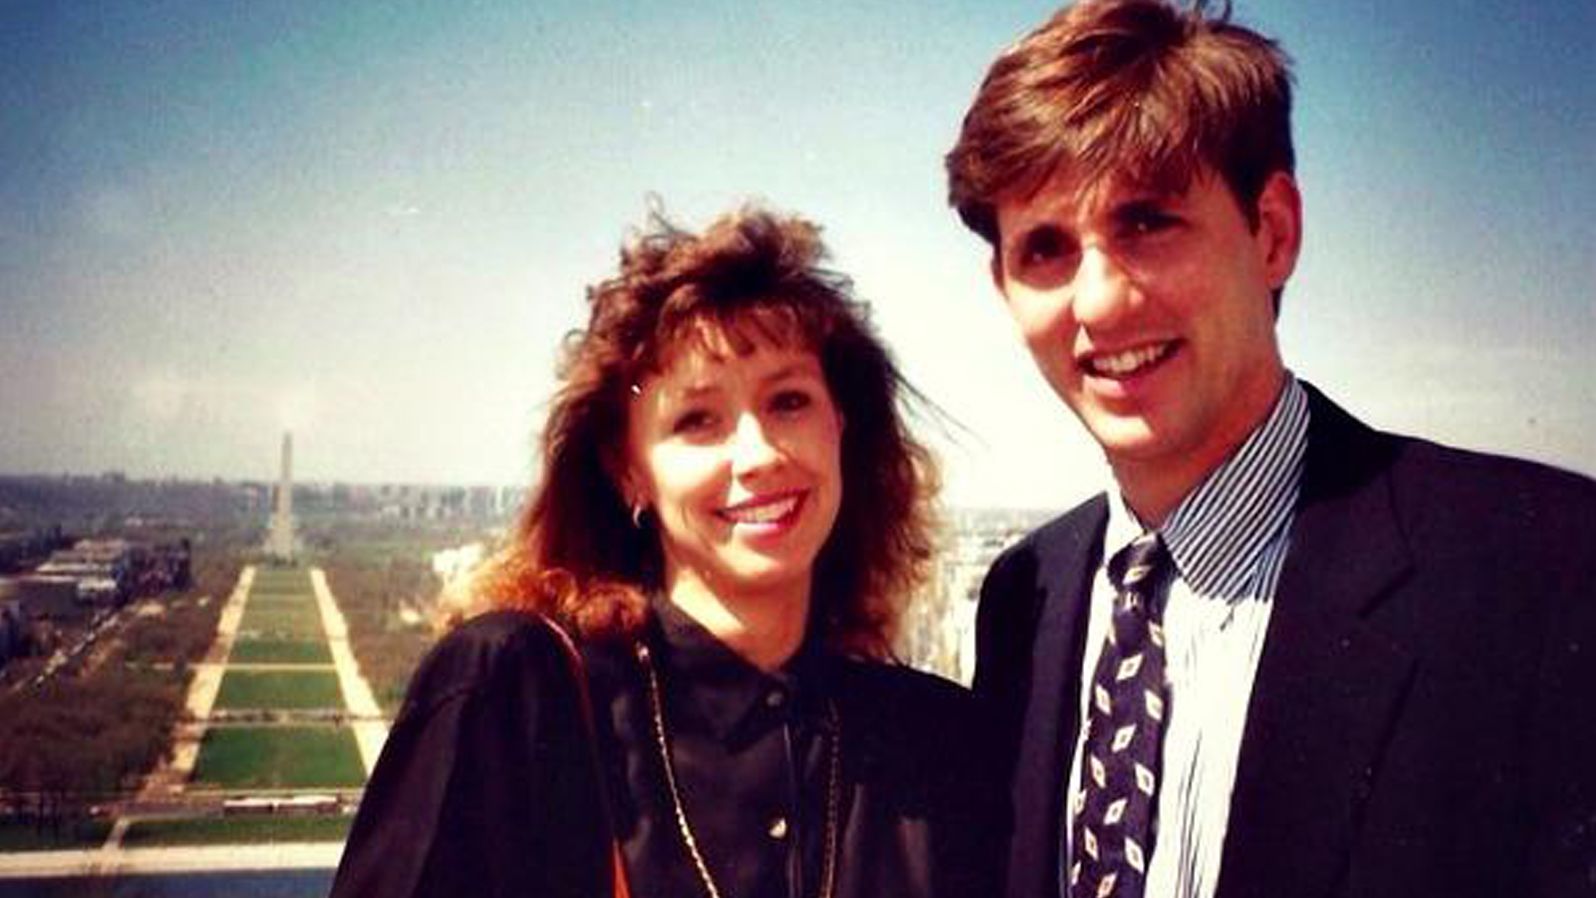 McCarthy and his future wife, Judy, pose for a photo at the top of the US Capitol circa 1987. McCarthy served on the staff of US Rep. Bill Thomas from 1987-2002. He started as an intern while attending California State University, Bakersfield.